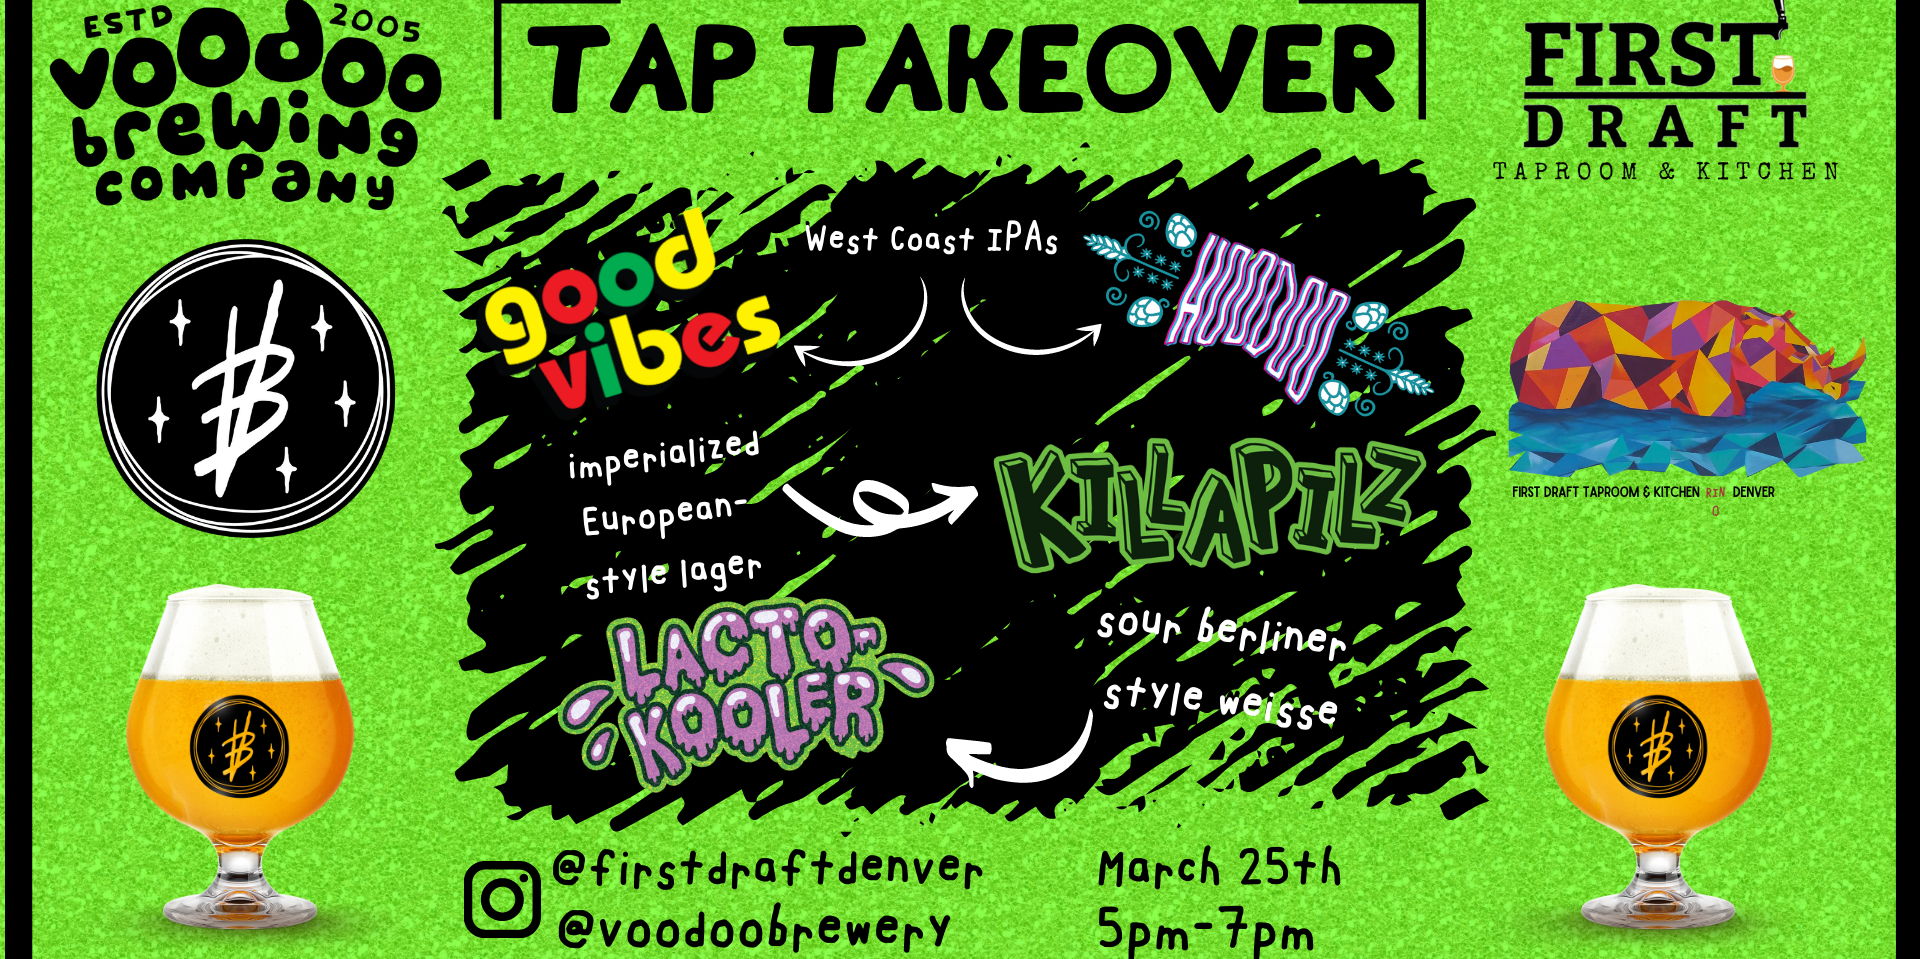 Voodoo Brewing Tap Takeover promotional image